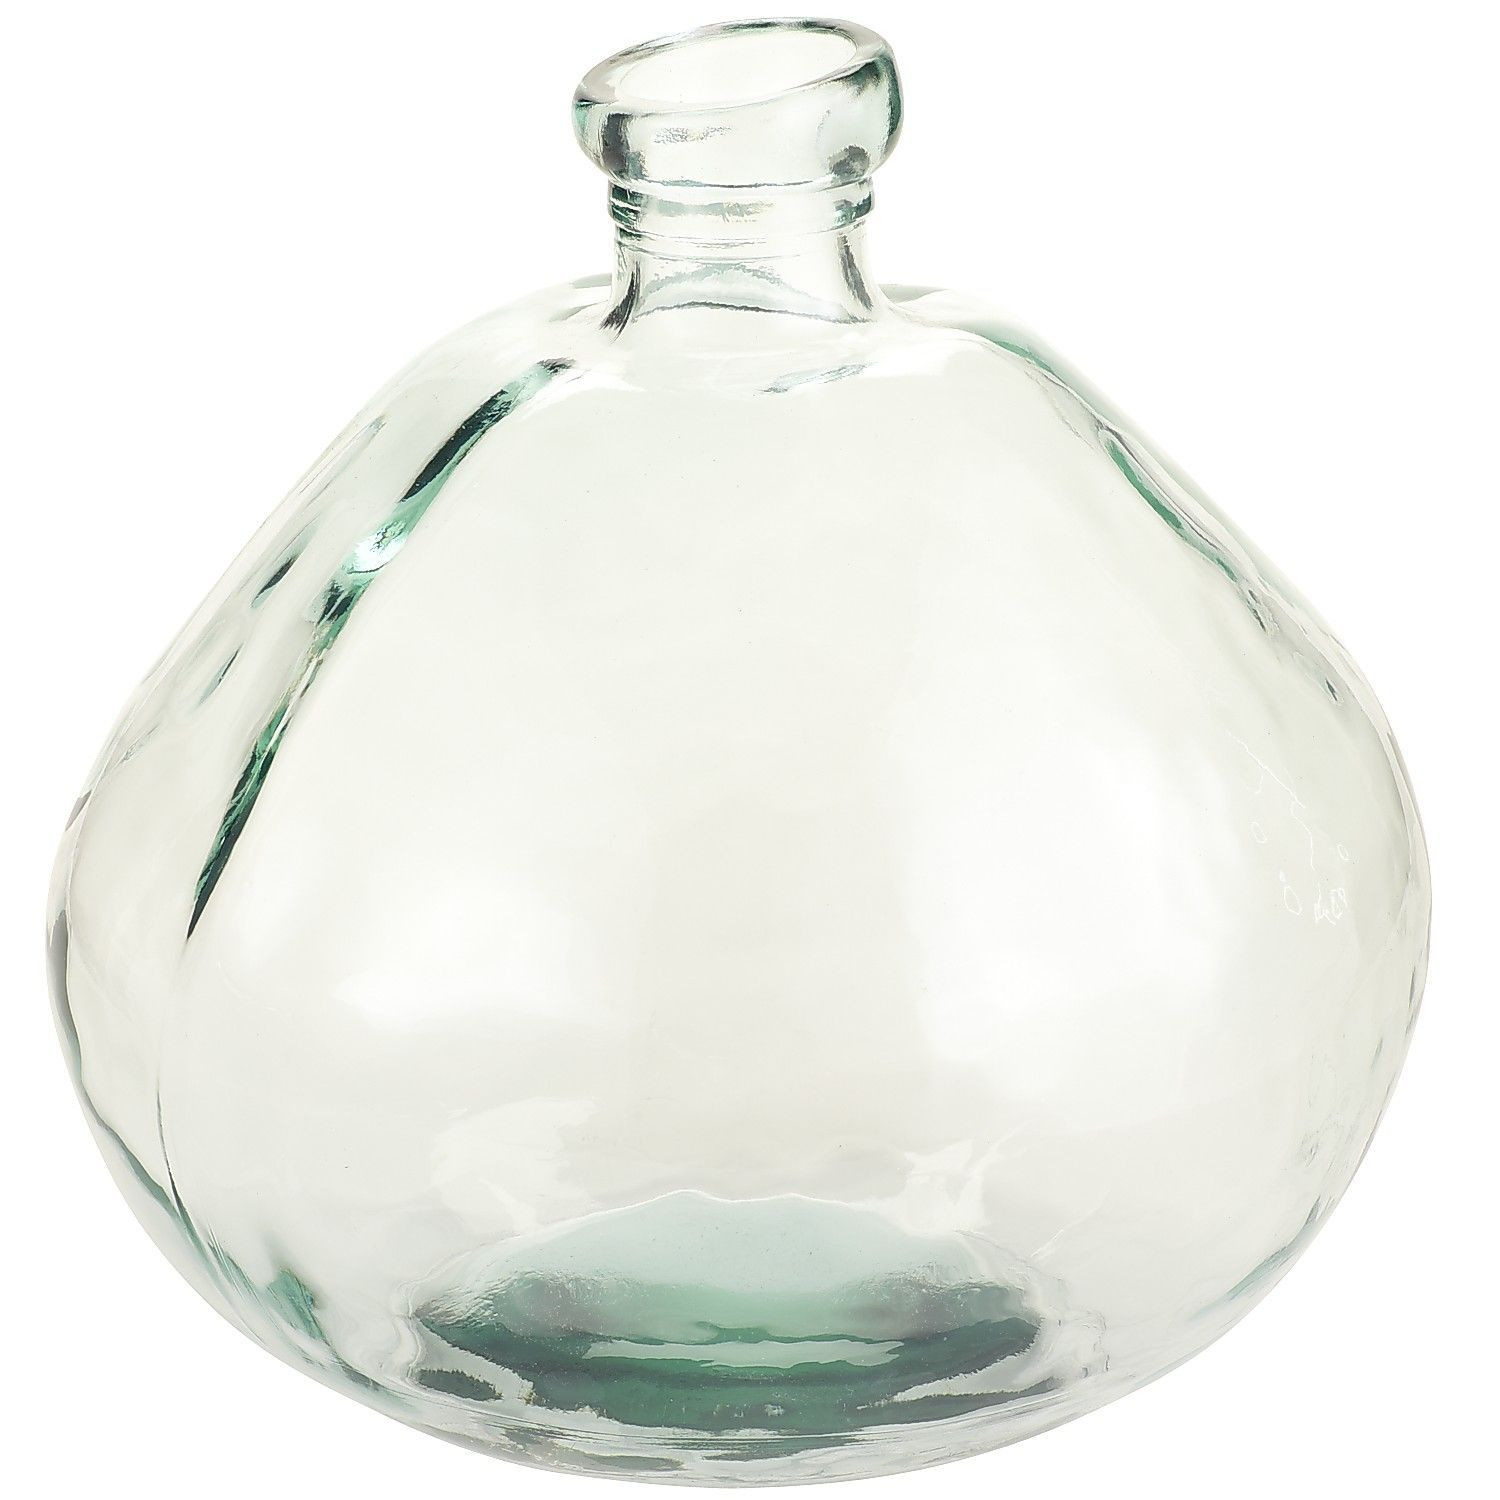 24 Lovely Long Neck Clear Glass Vase 2024 free download long neck clear glass vase of recycled glass vase narrow neck pier 1 imports extra cottage pertaining to recycled glass vase narrow neck pier 1 imports